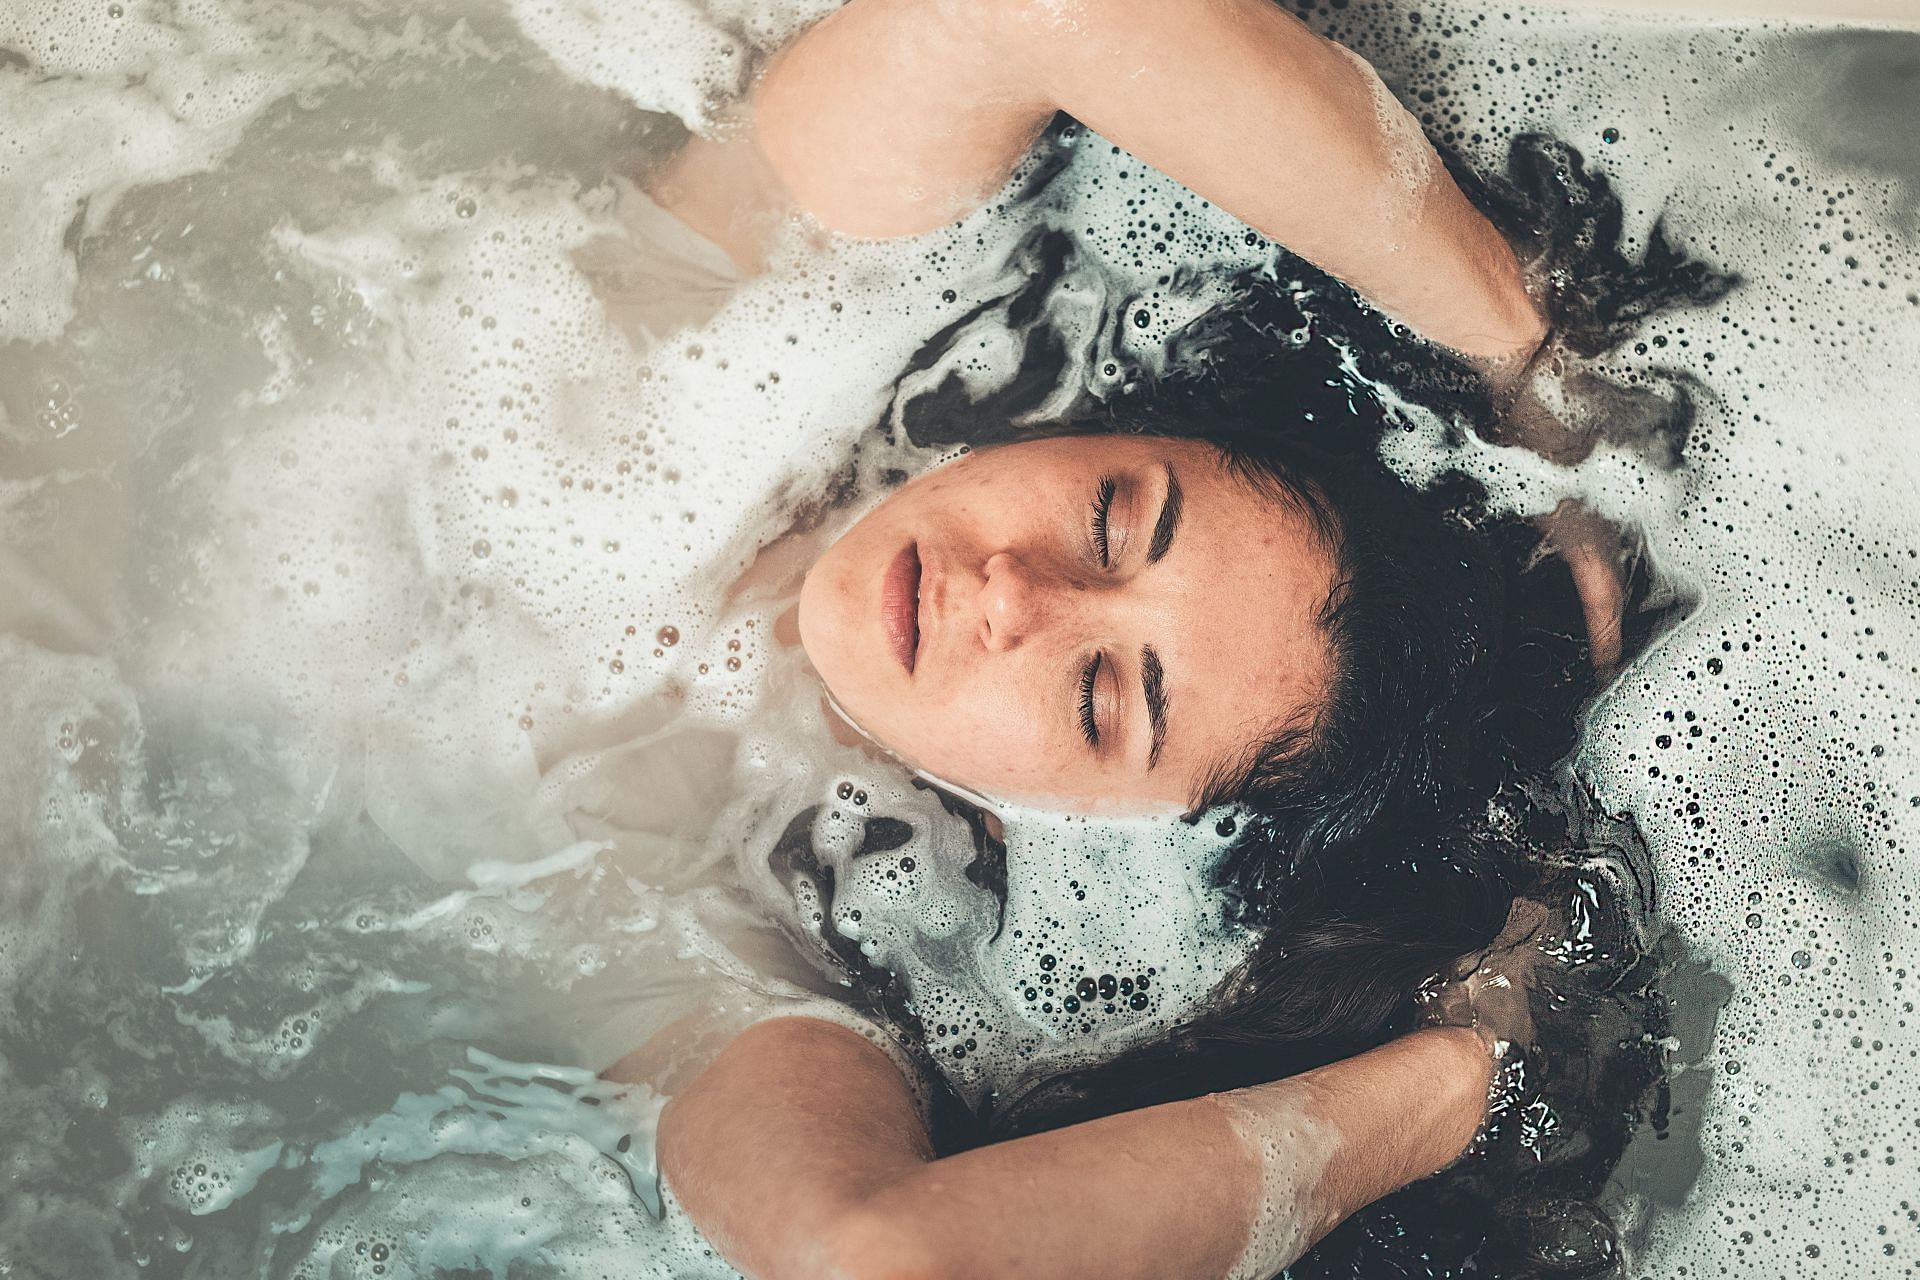 A nice bath can be soothing after a ling day. (Image via Pexels/ Craig Adderley)